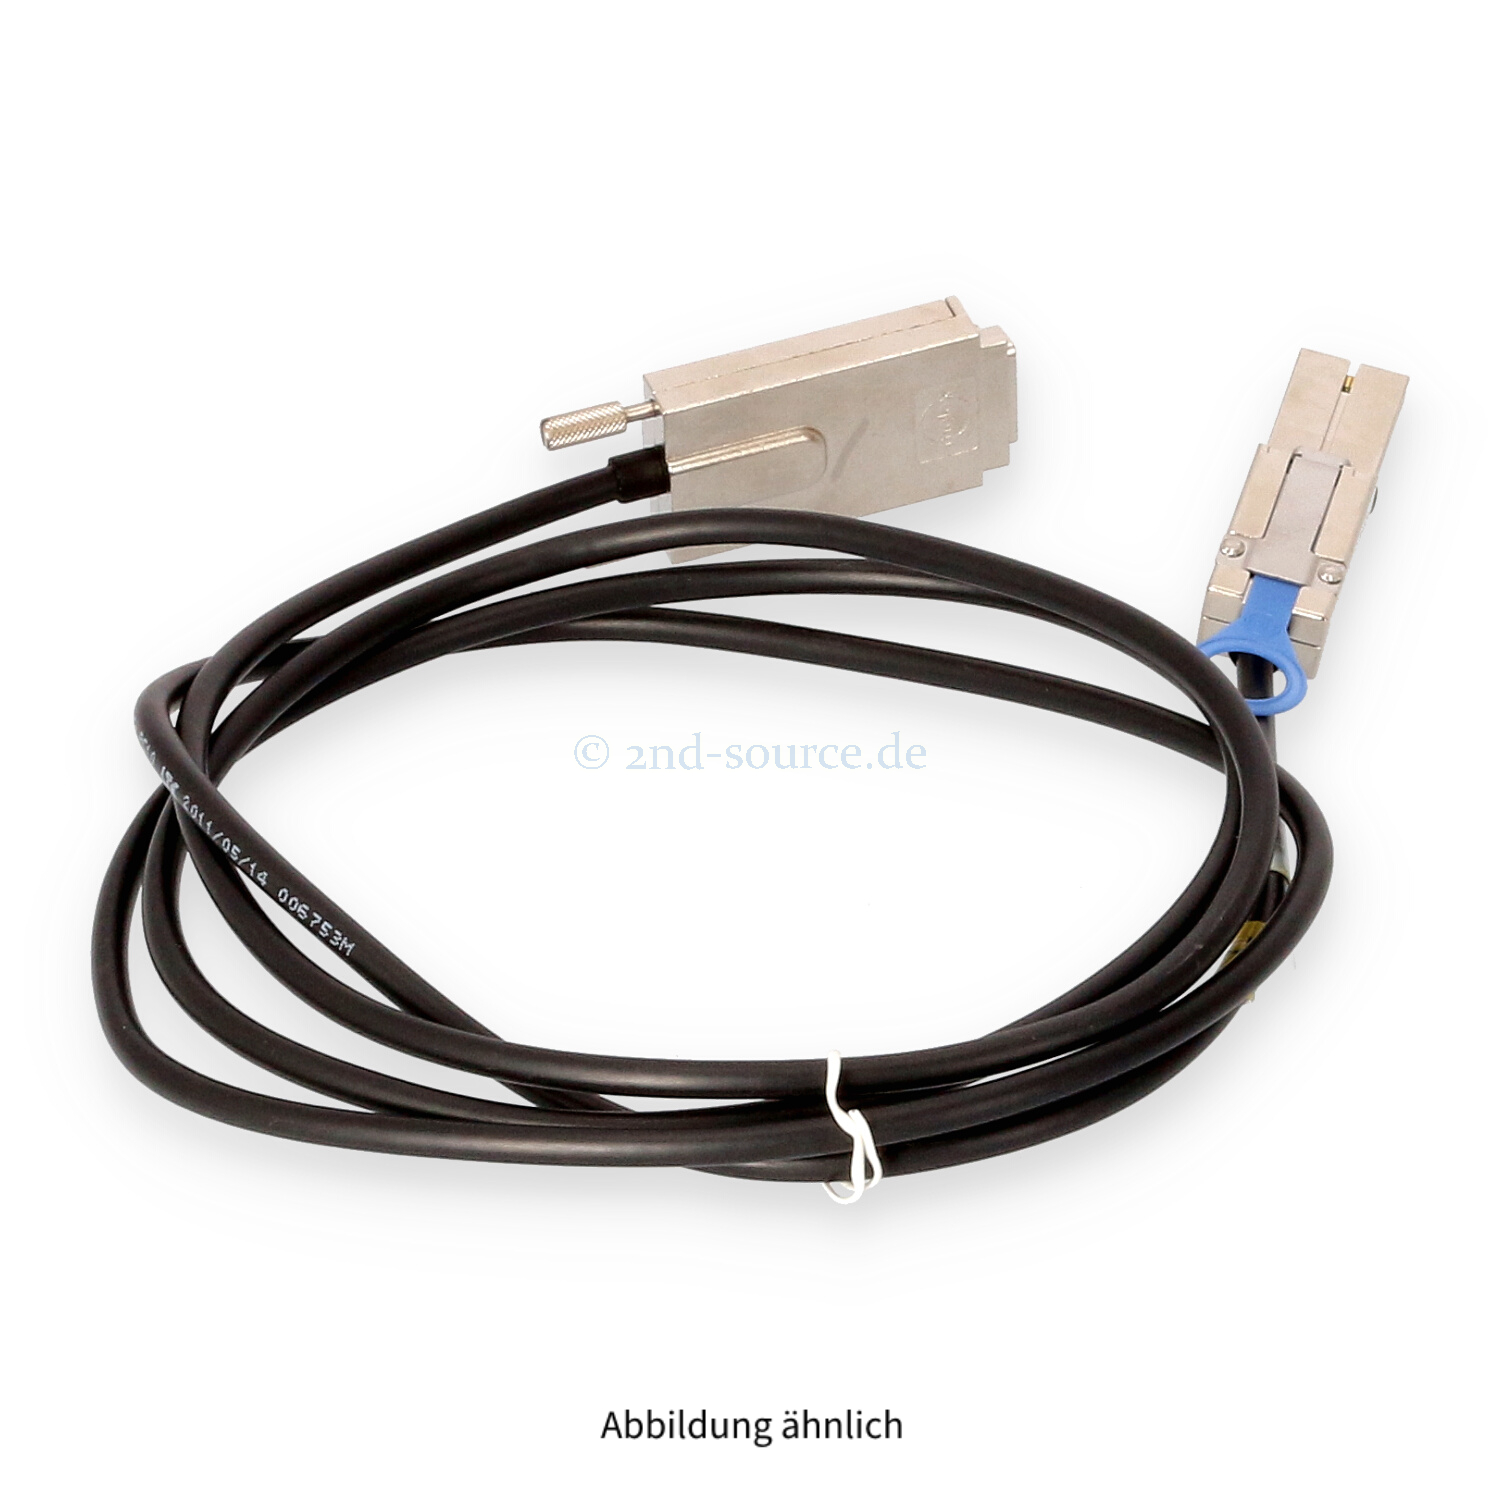 HPE 2.0m MiniSAS SFF-8470 to SFF-8088 Cable MSL2024 406591-001 430064-001